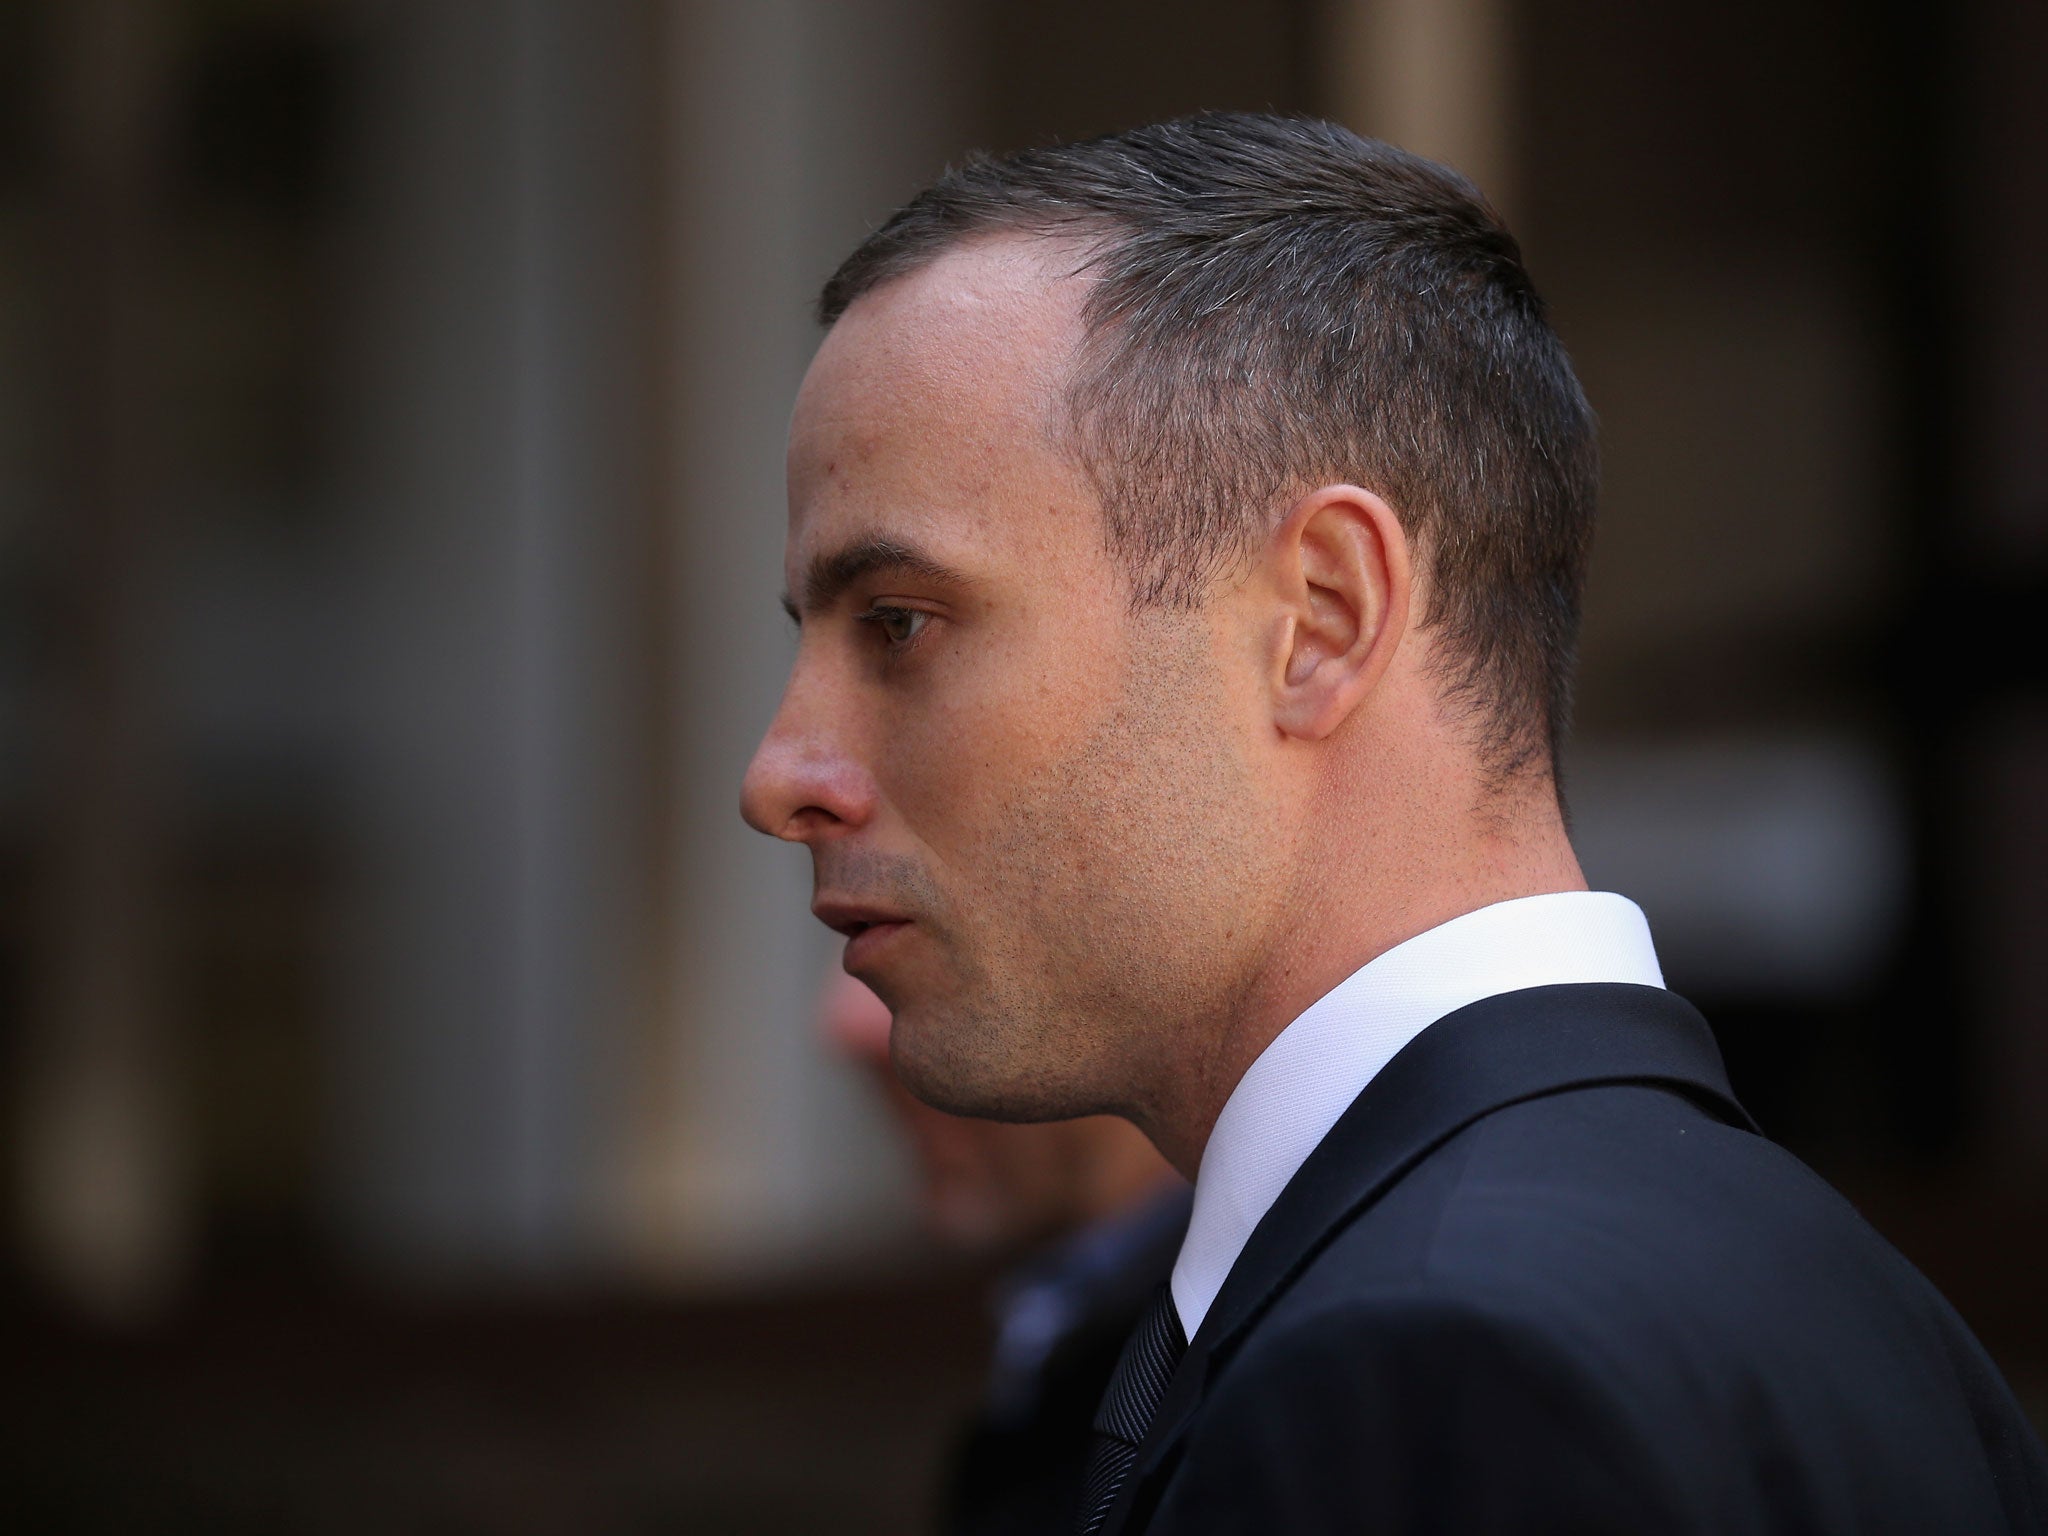 Oscar Pistorius leaves North Gauteng High Court after the judge ordered that he should undergo mental evaluation